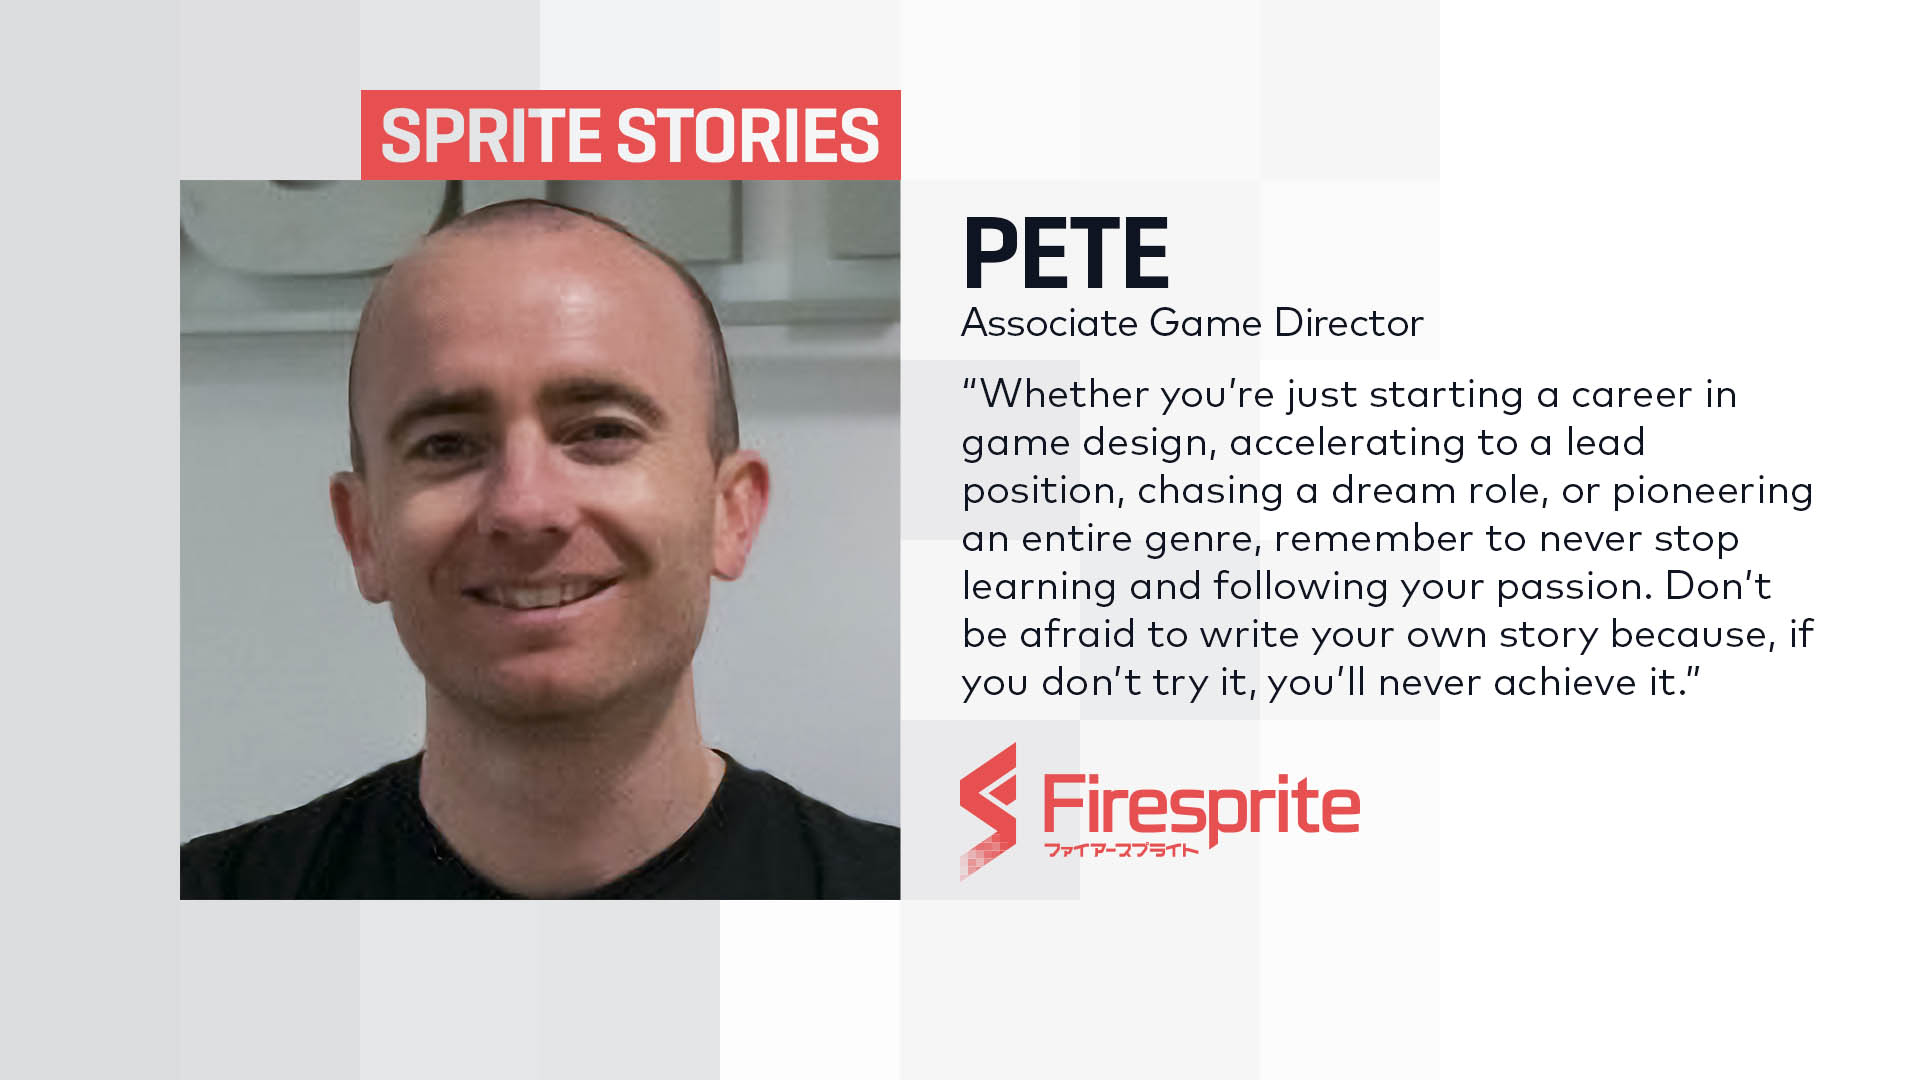 Person smiling at camera for portrait photo to share their games industry story. Person’s photos sits left of a white and grey pixel backdrop which displays name, role and the Firesprite logo in red and an article pull quote in black text.